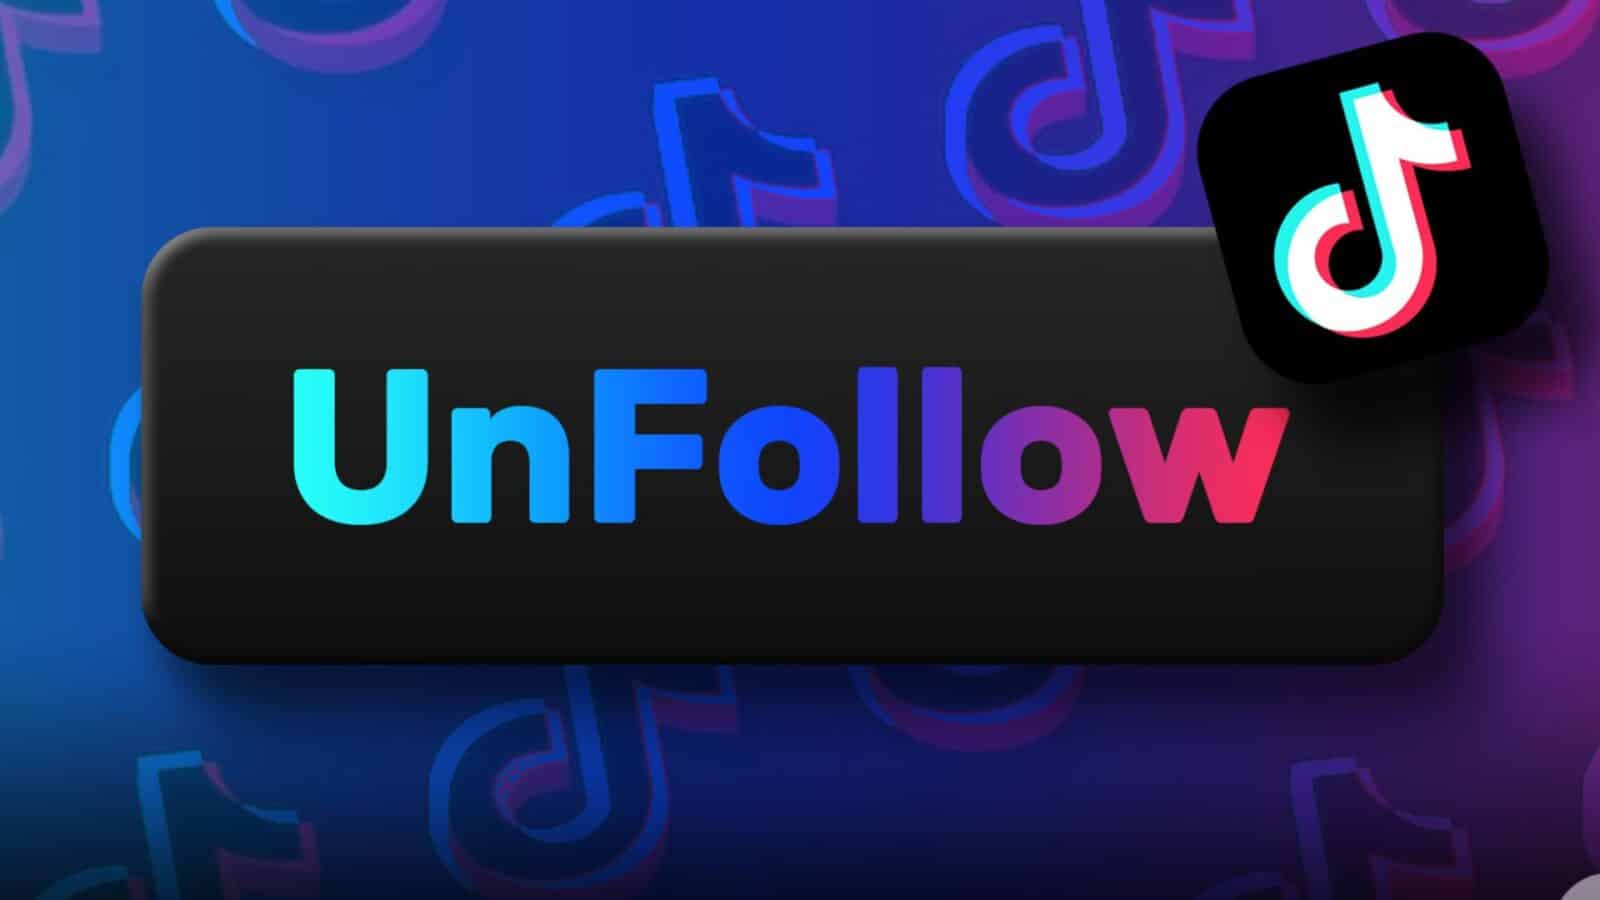 How to Unfollow on TikTok? A Step-by-Step Guide